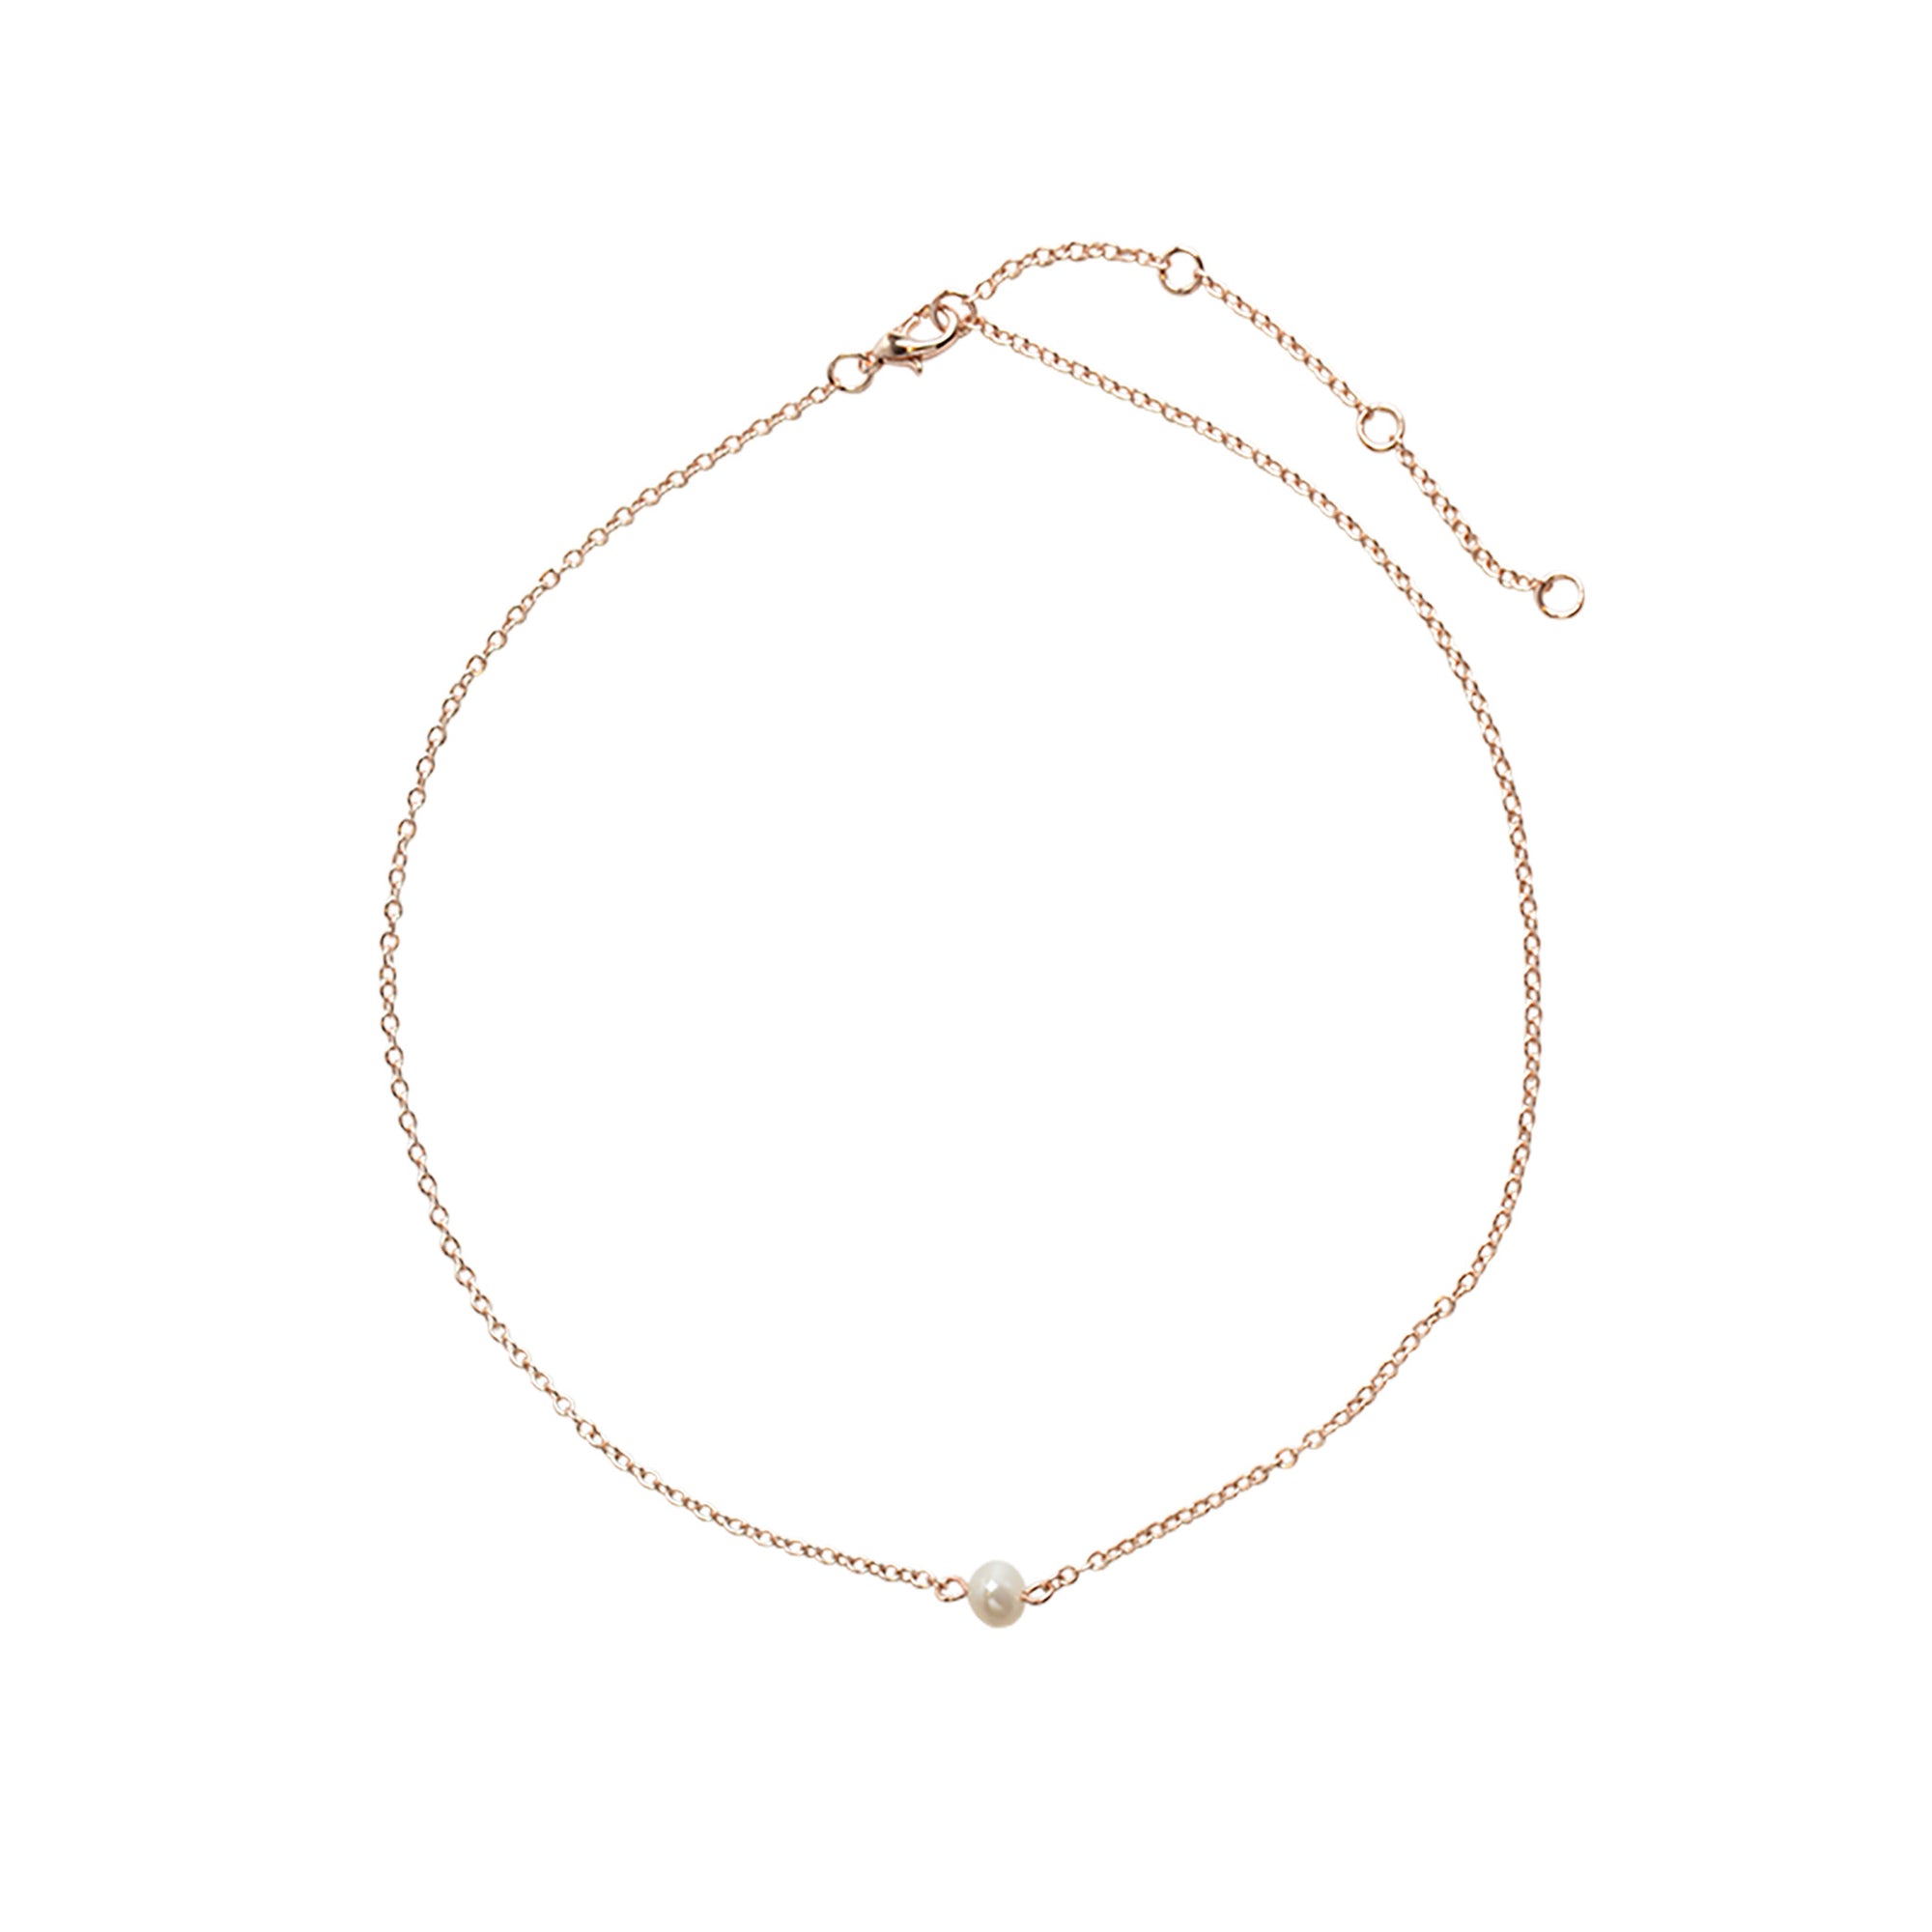 Freshwater Pearl Necklace - Viva life Jewellery